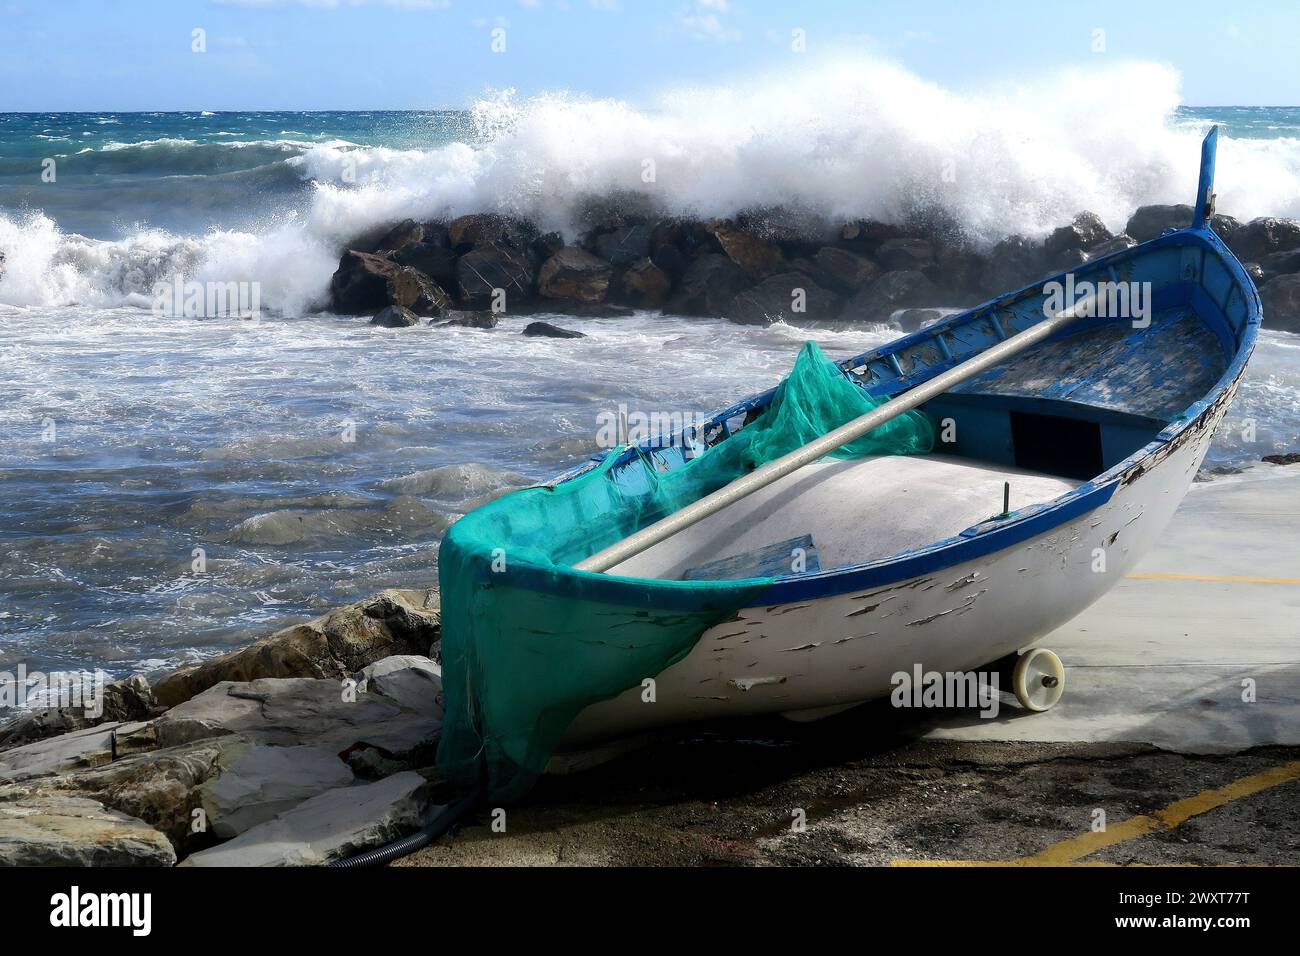 A boat rests on the shore near a rocky ledge as waves crash in the distance Stock Photo